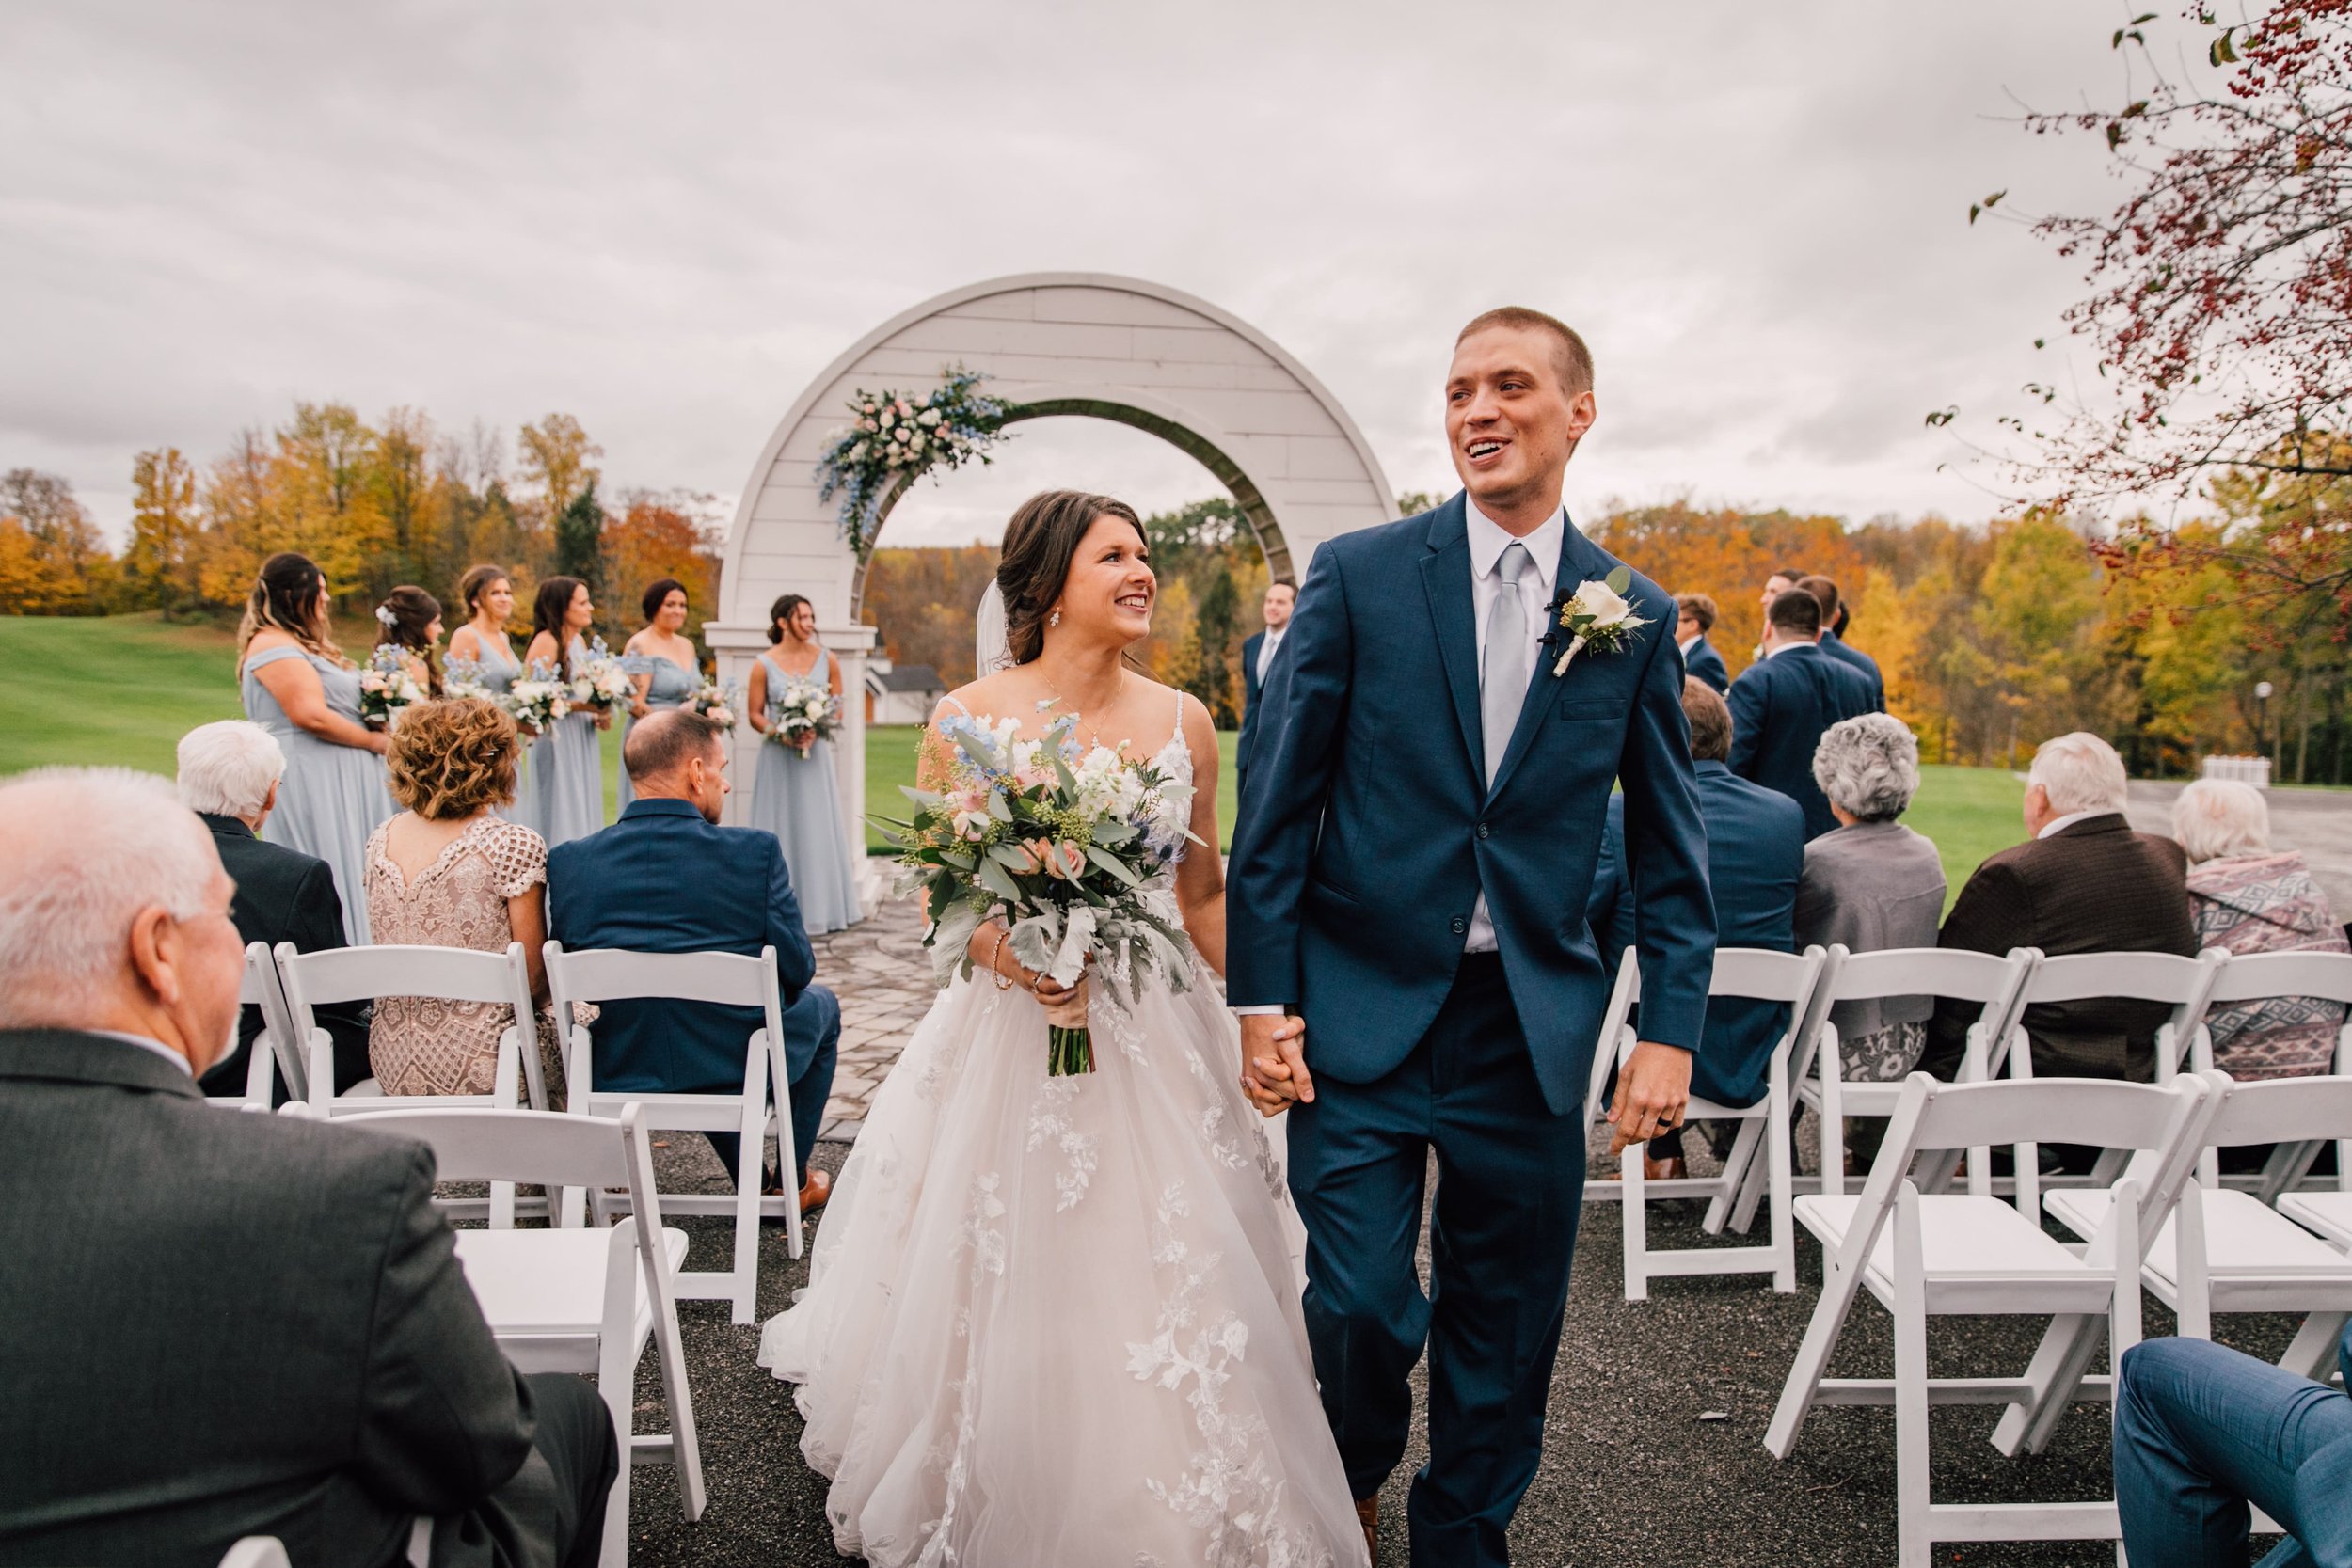  the bride and groom beam as they walk down the aisle together after their outdoor fall wedding 